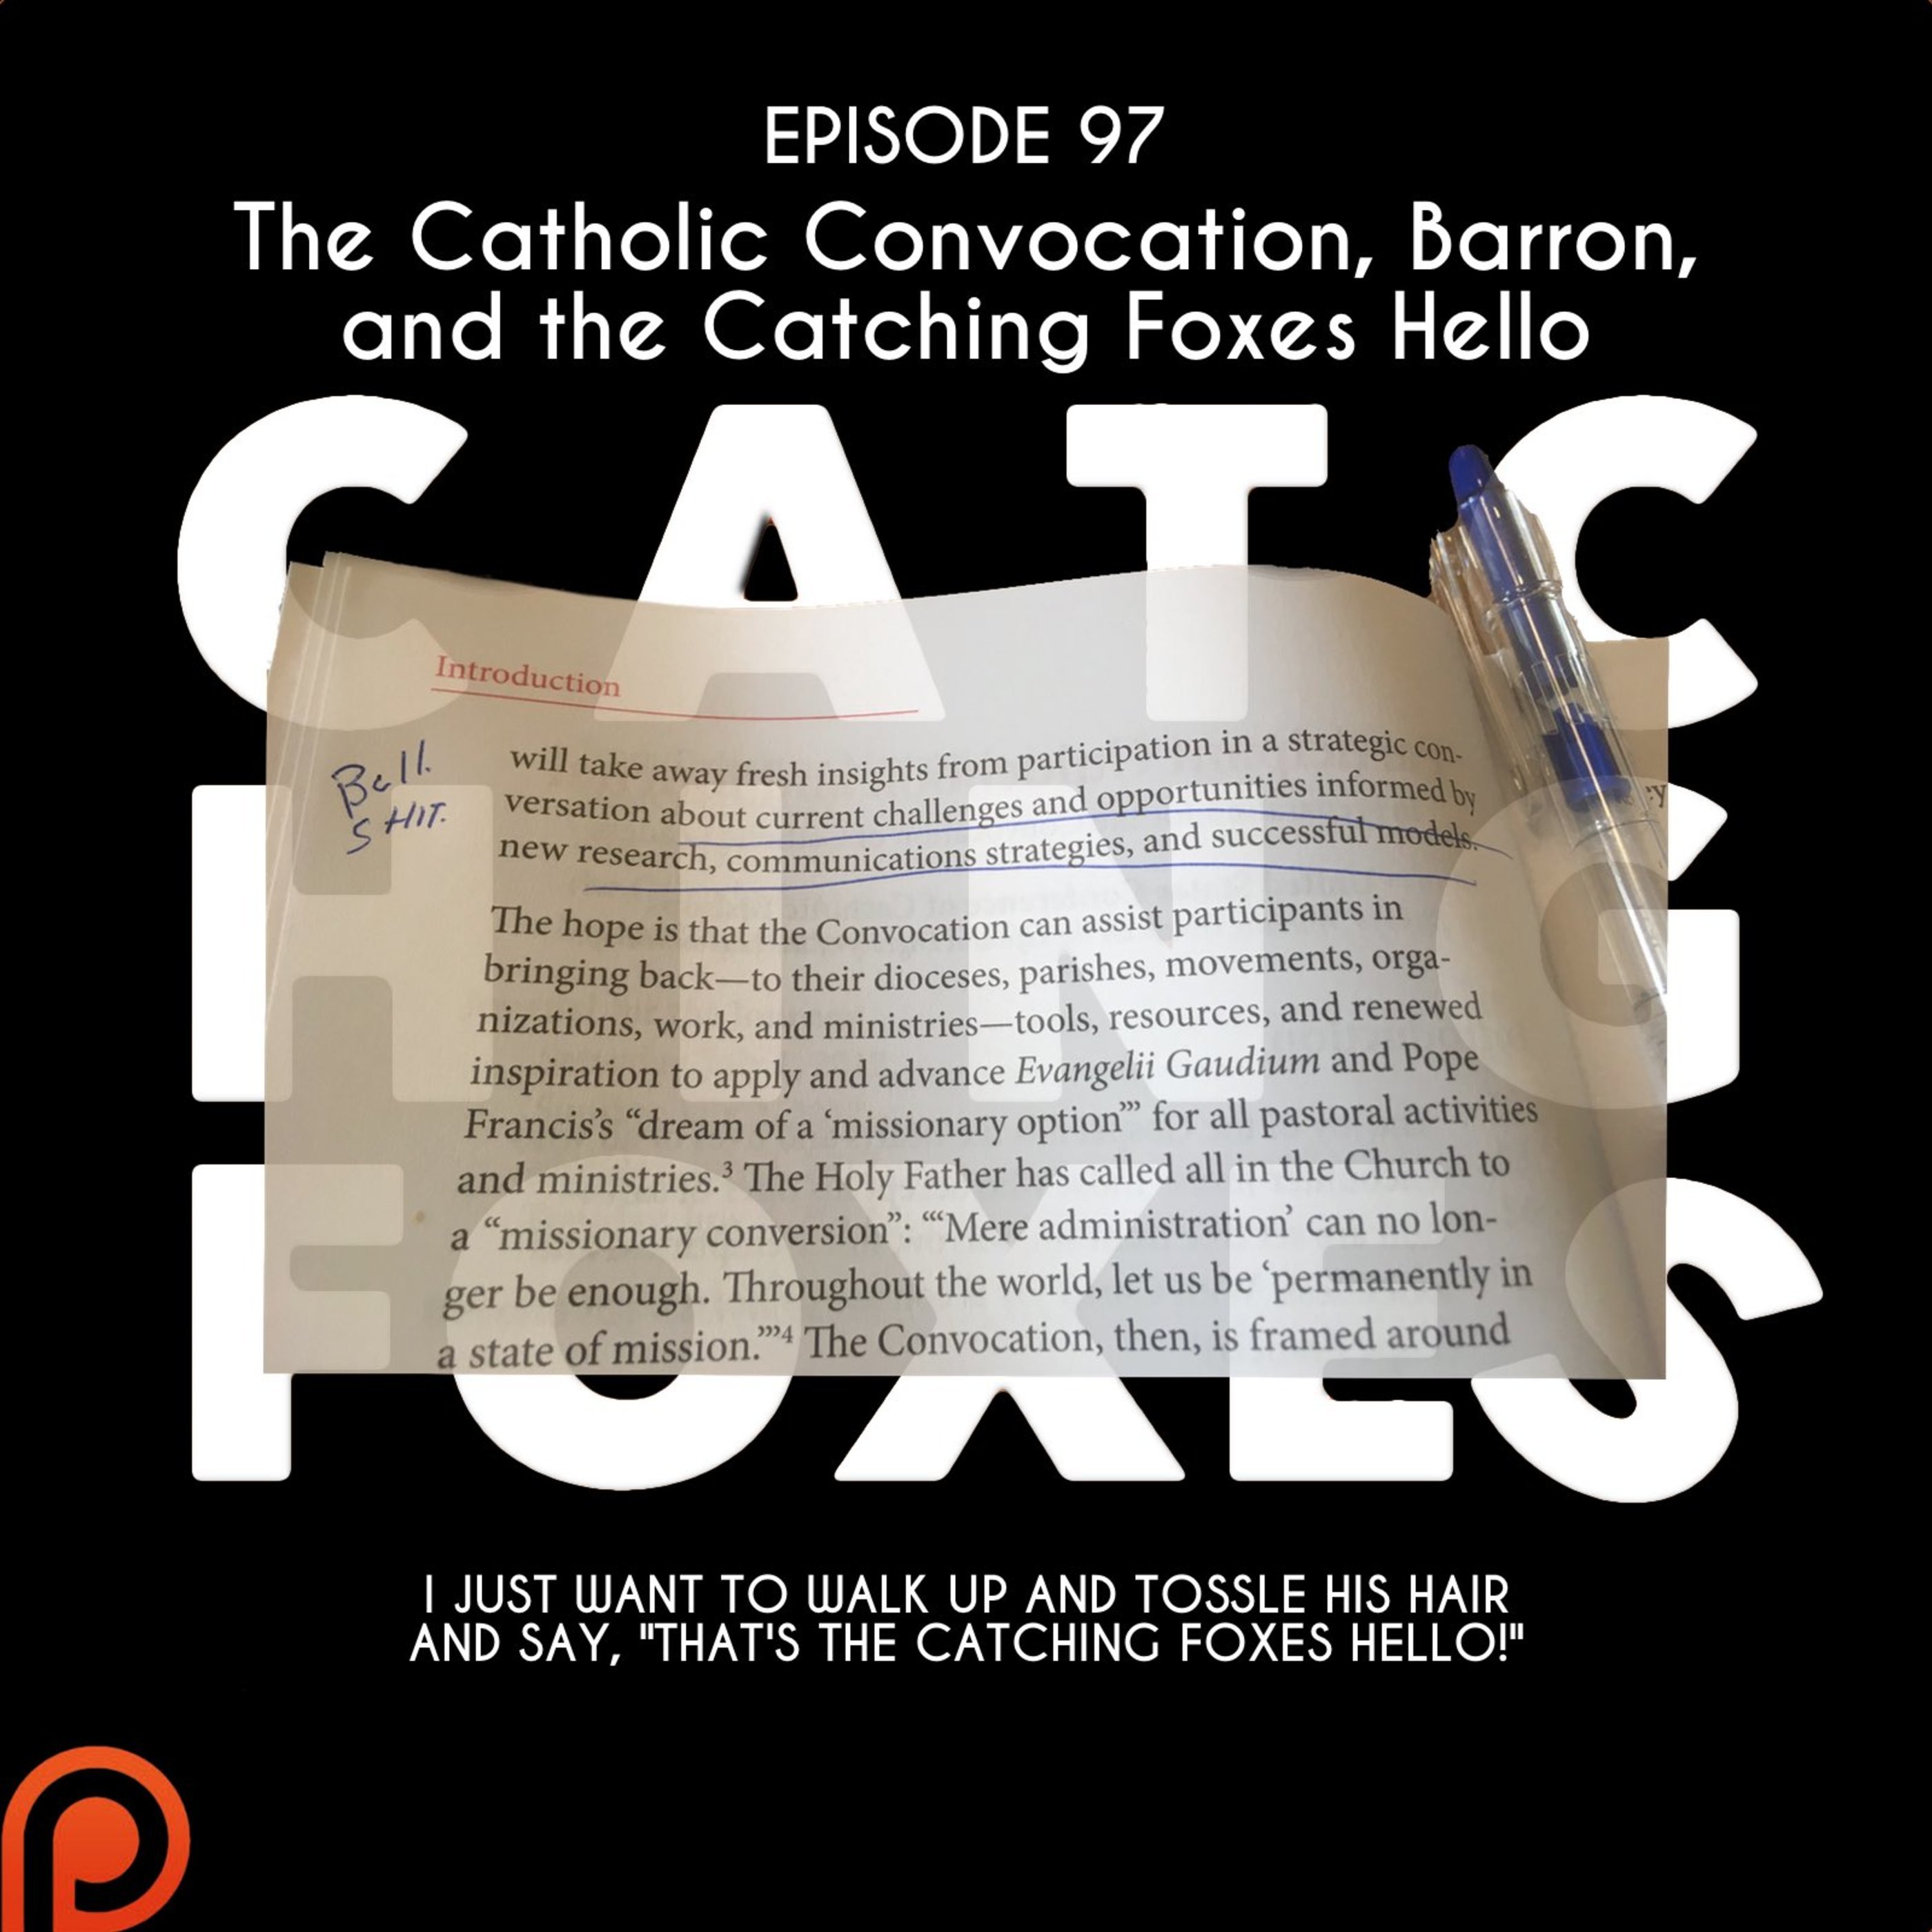 The Catholic Convocation, Barron, and the Catching Foxes Hello